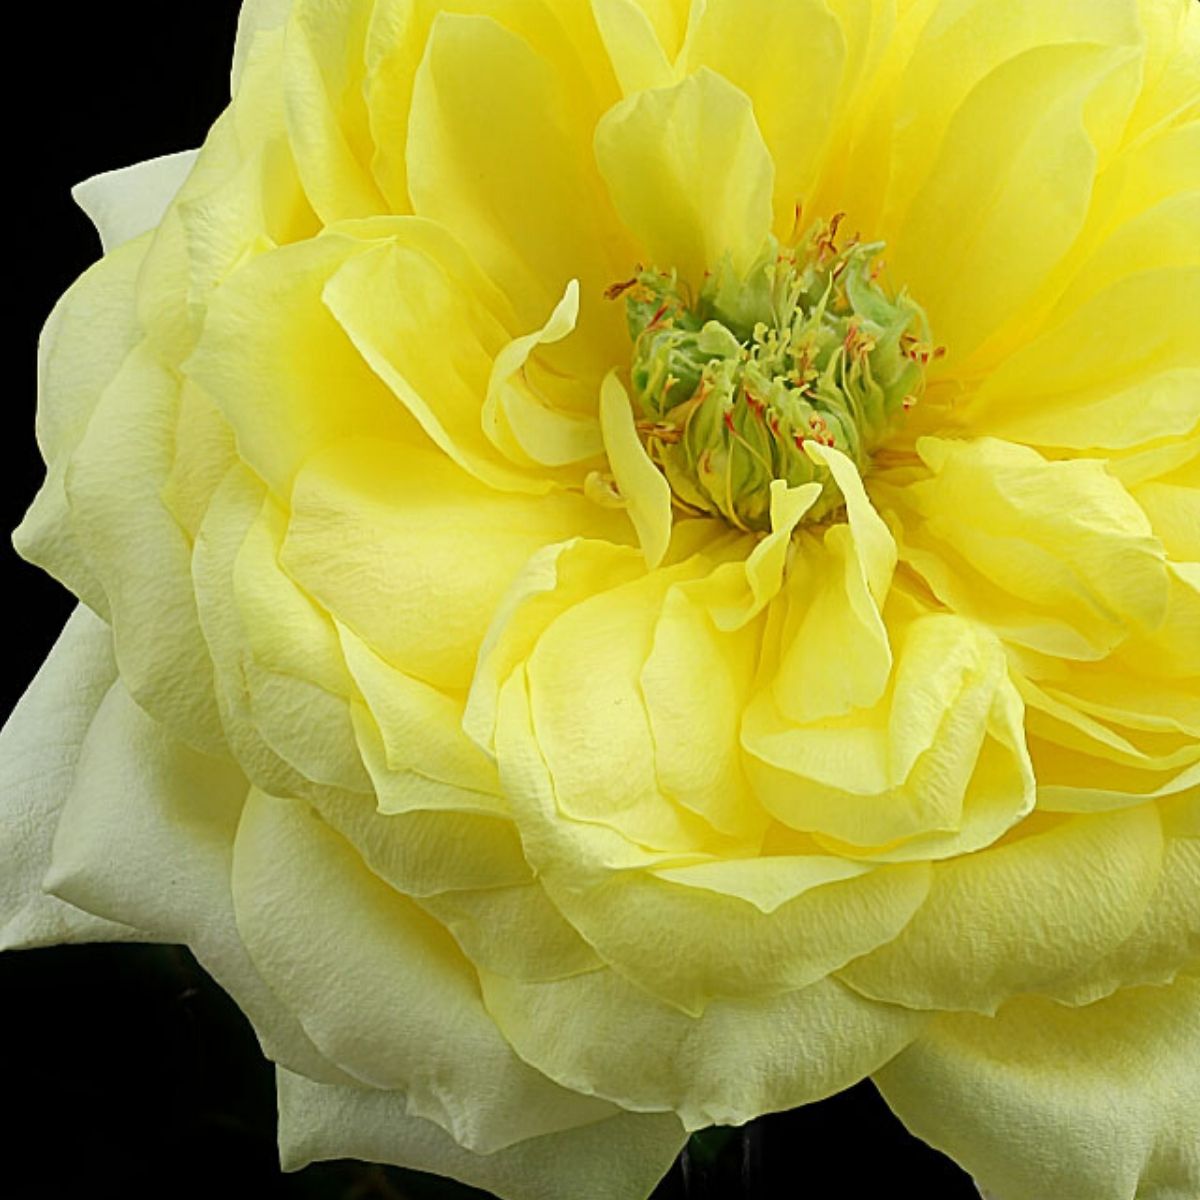 How Do Our Brains Respond to Yellow Flowers? - Article onThursd